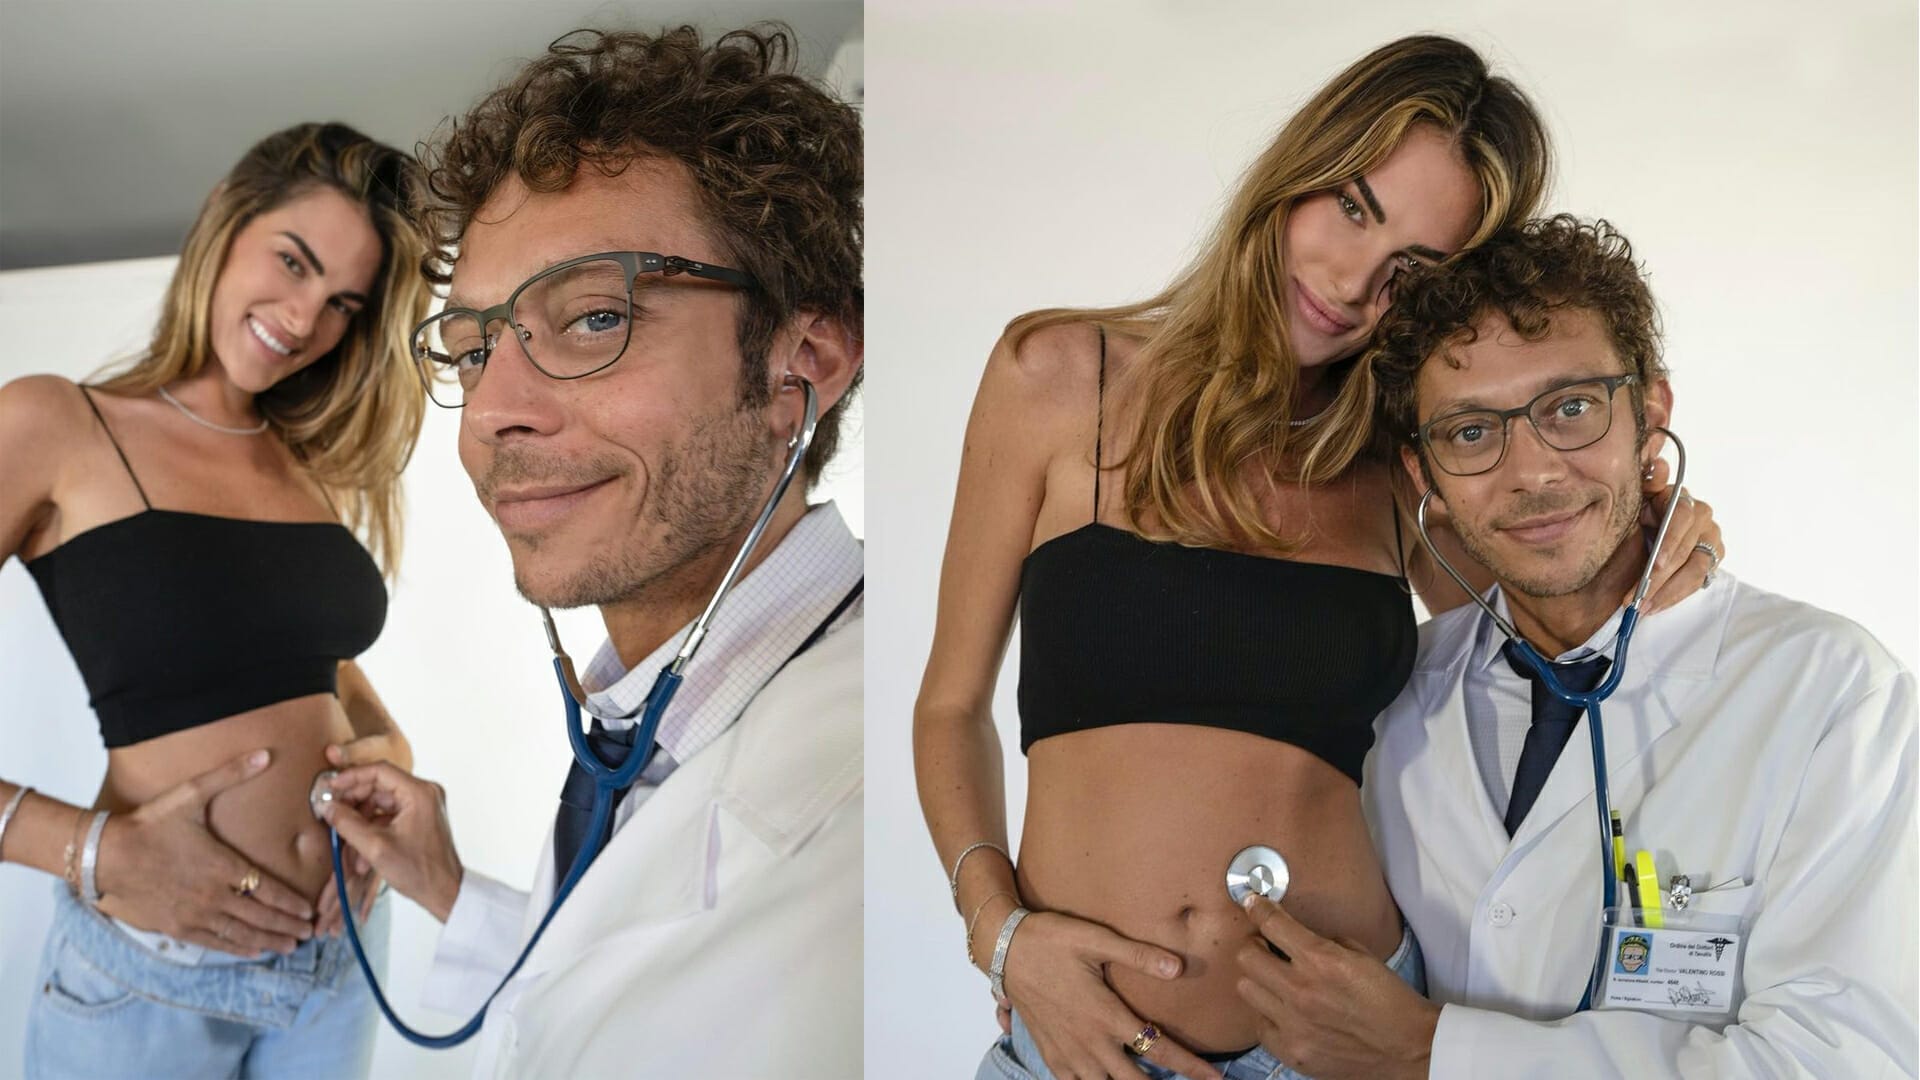 Rossi becomes a father
- also in the MOTORCYCLES.NEWS APP